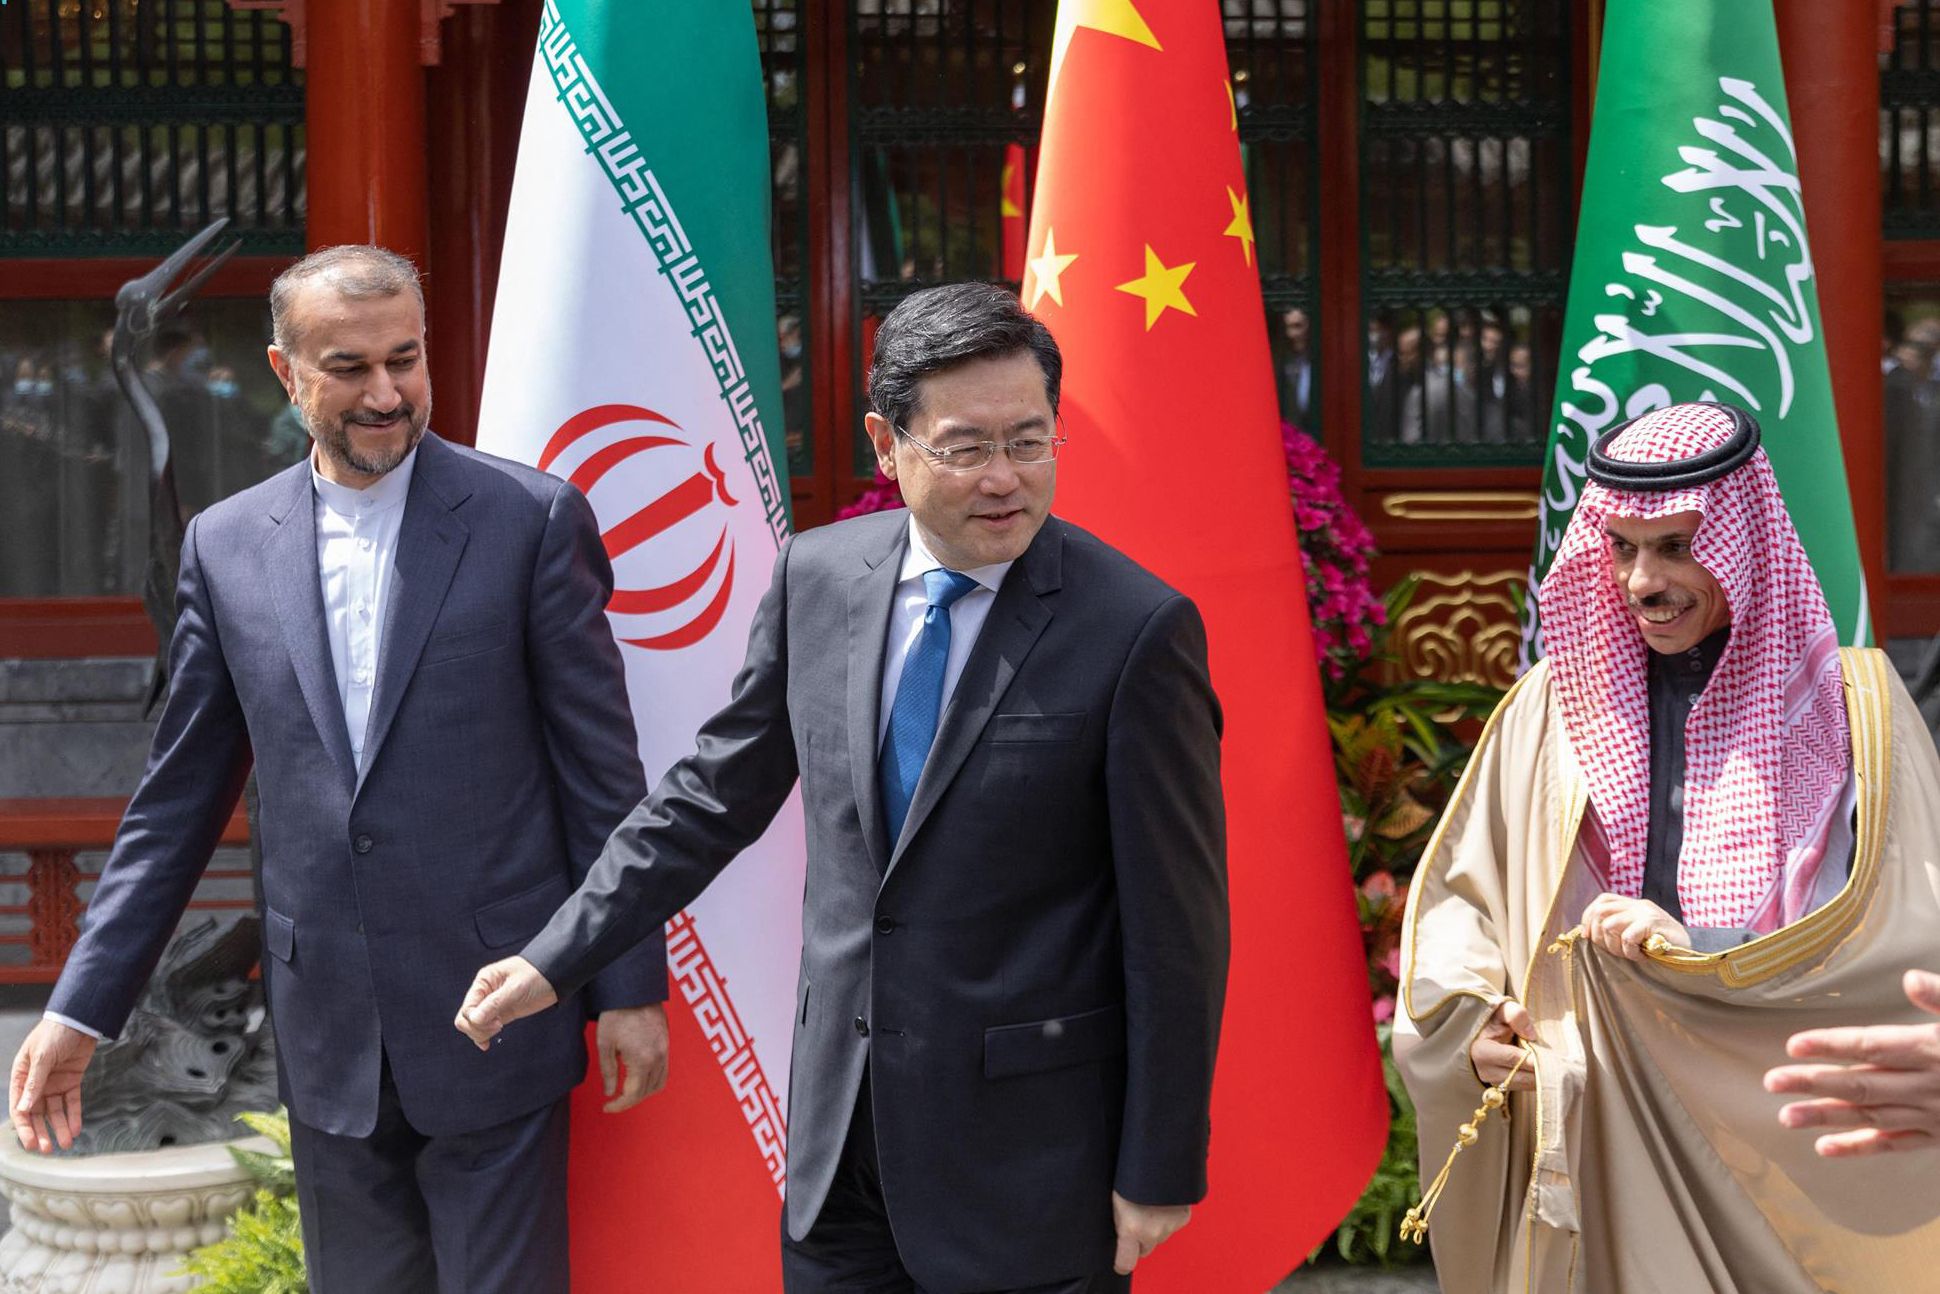 Iran’s foreign minister Hossein Amir-Abdollahian (L) walking alongside Saudi foreign afairs Minister Prince Faisal bin Farhan a-Saud (R) and Chinese foreign minister Qin Gang during a meeting in Beijing